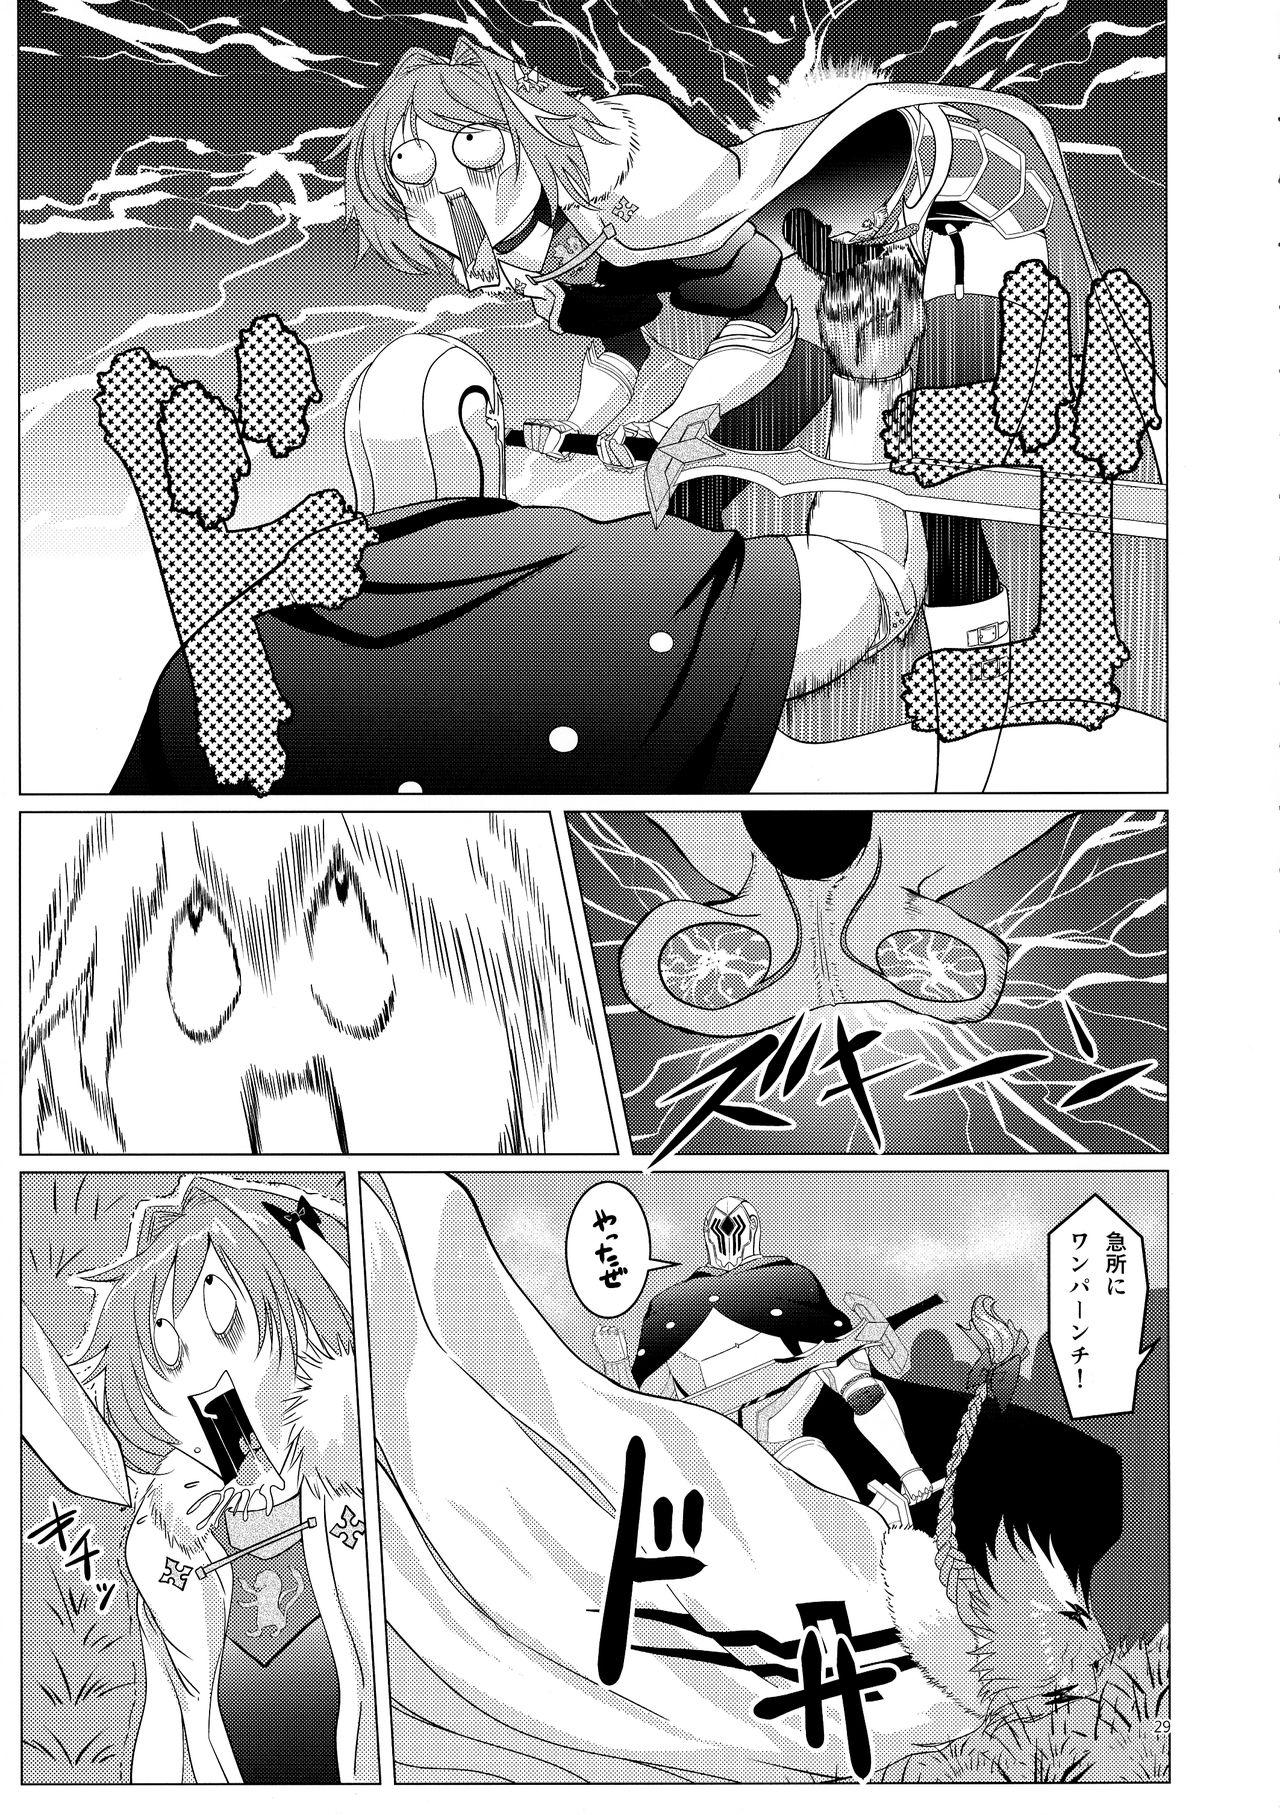 Matching Spirits - Jeanne and Astolfo have sex 25